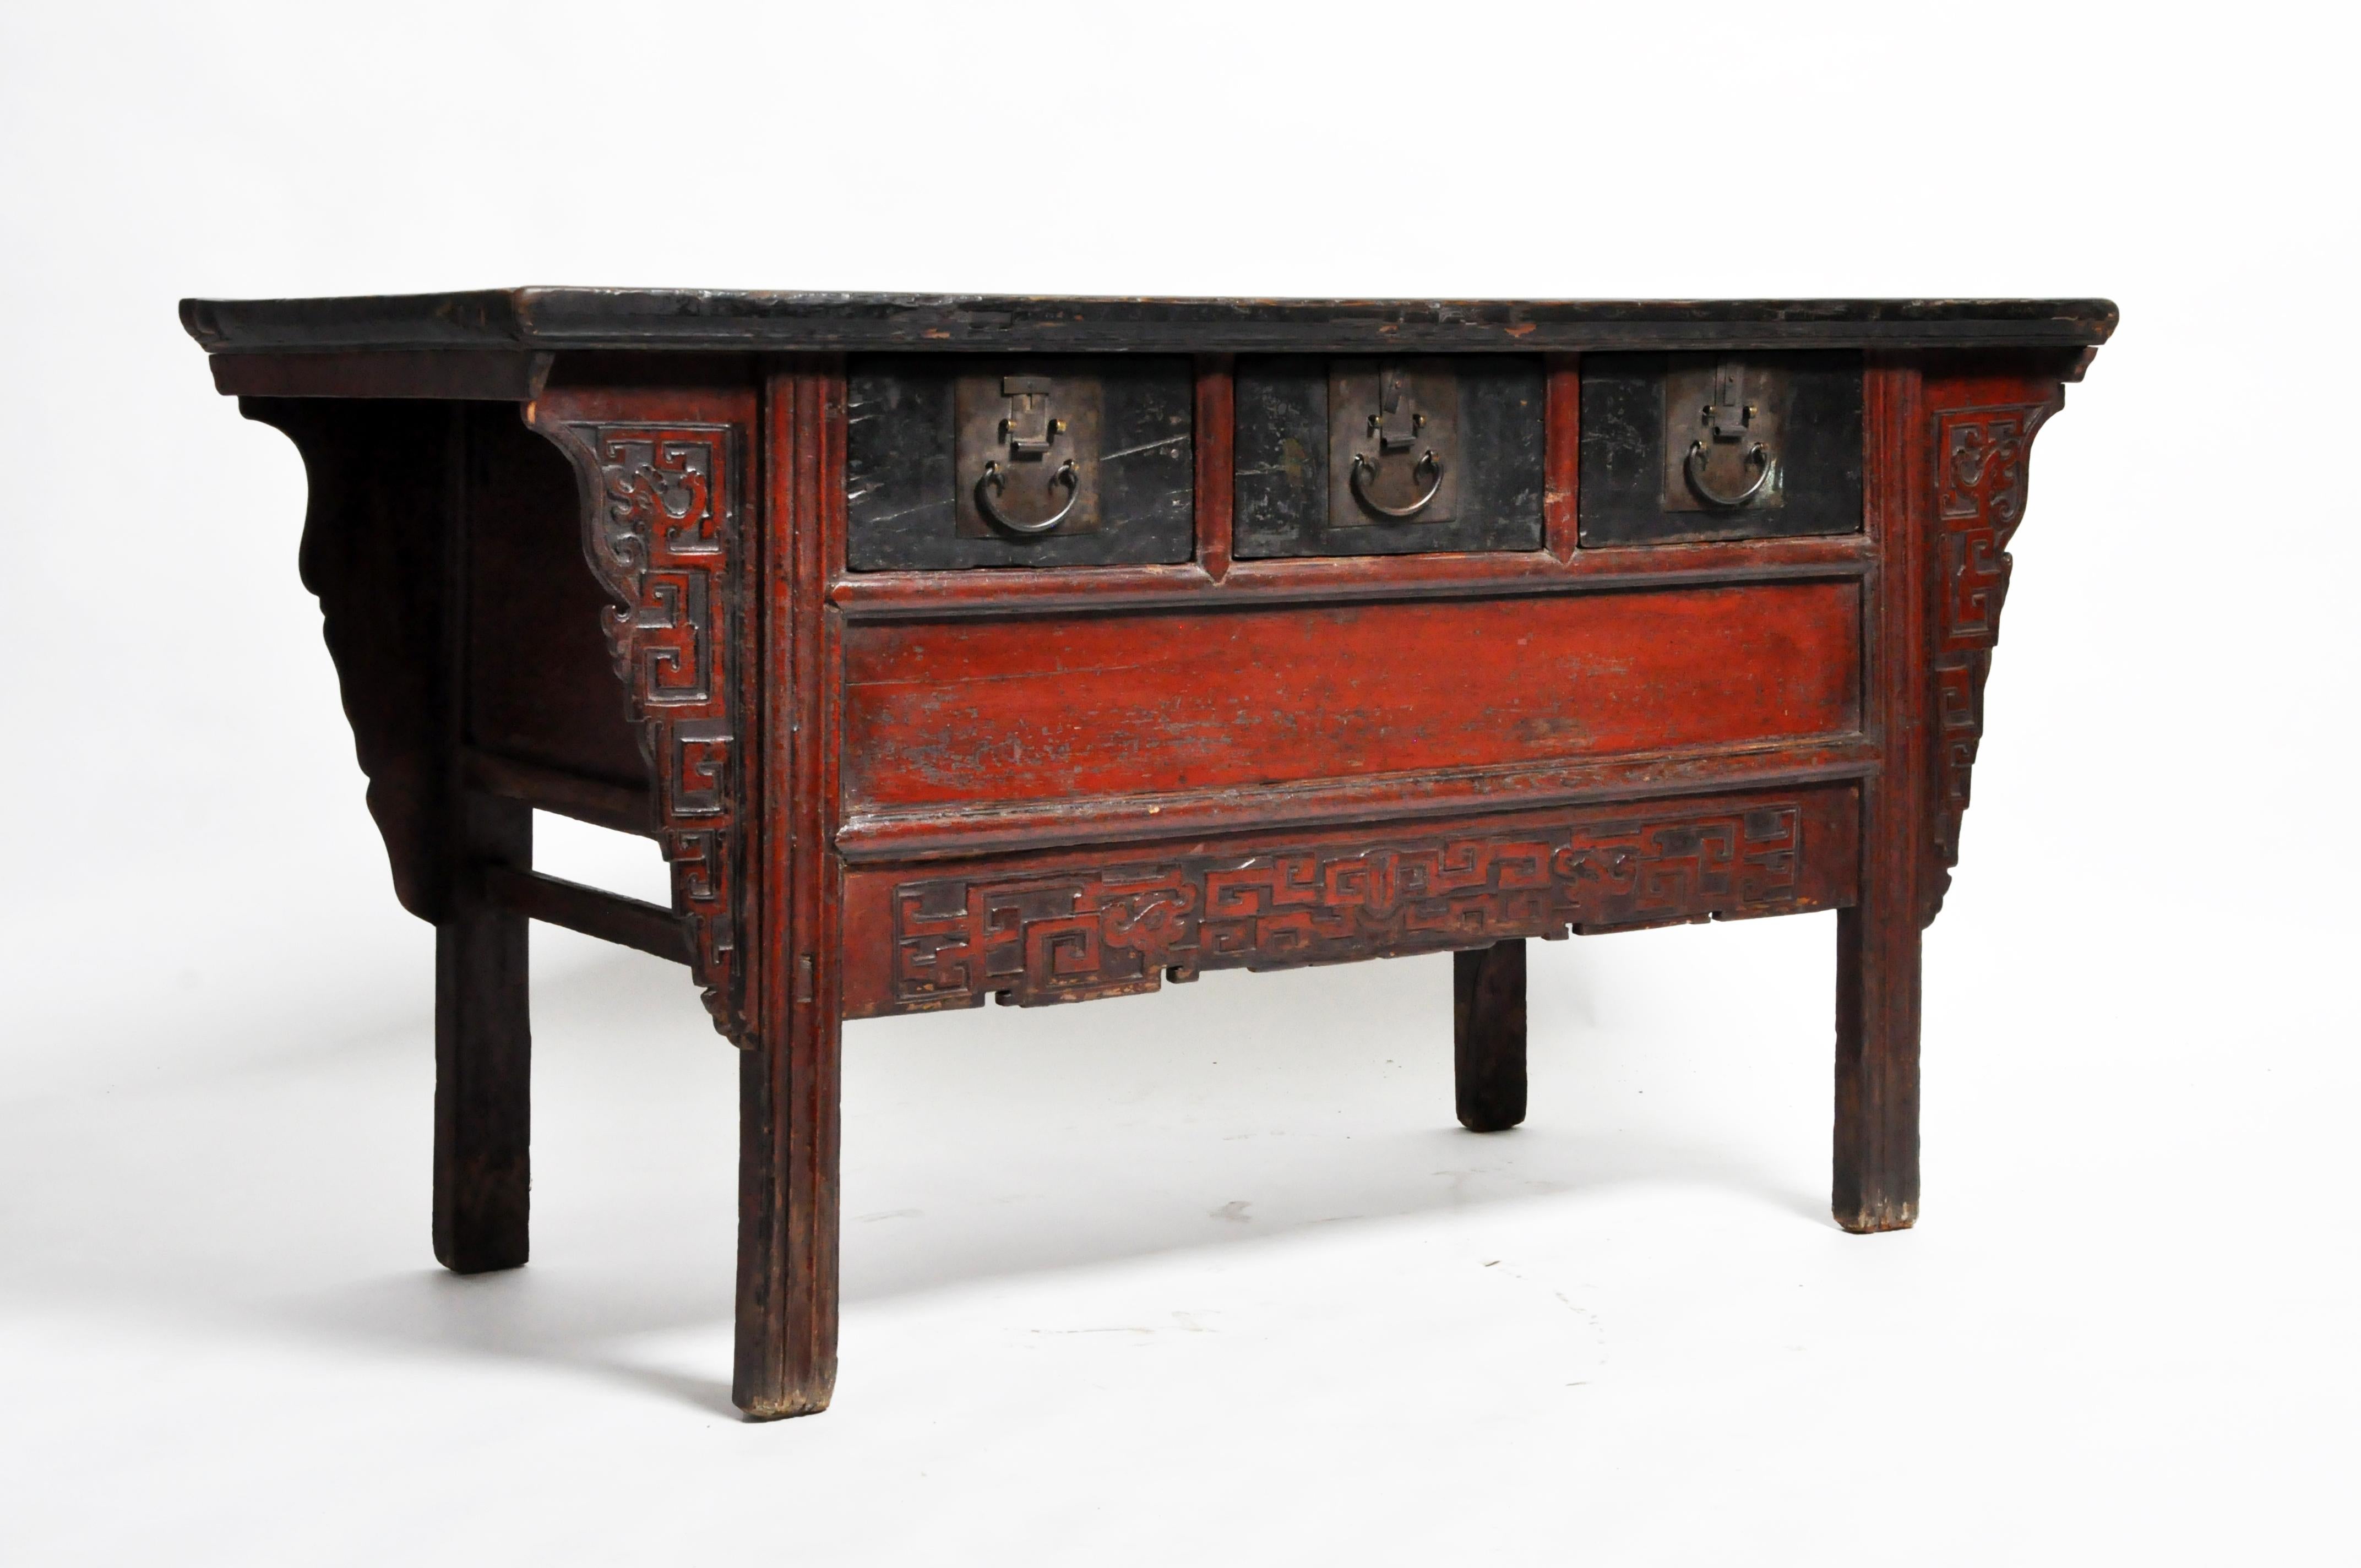 This gorgeous altar coffer is from China and was made from elmwood and lacquer circa 1880. The piece features its beautifully aged original patina with three drawers for storage. The coffer is from the late Qing dynasty period.